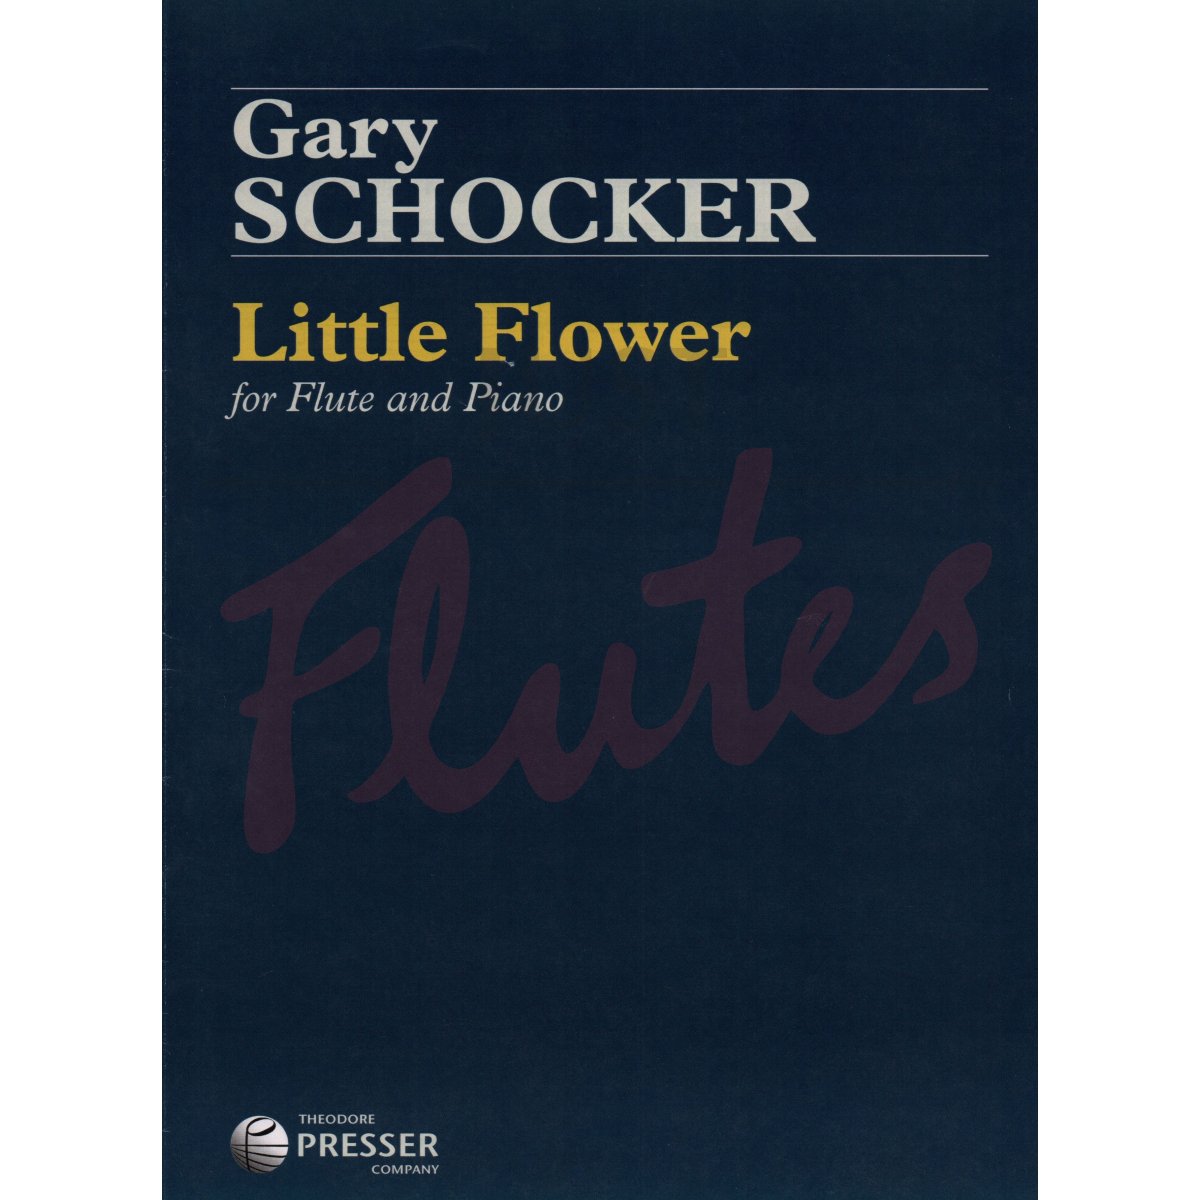 Little Flower for Flute and Piano